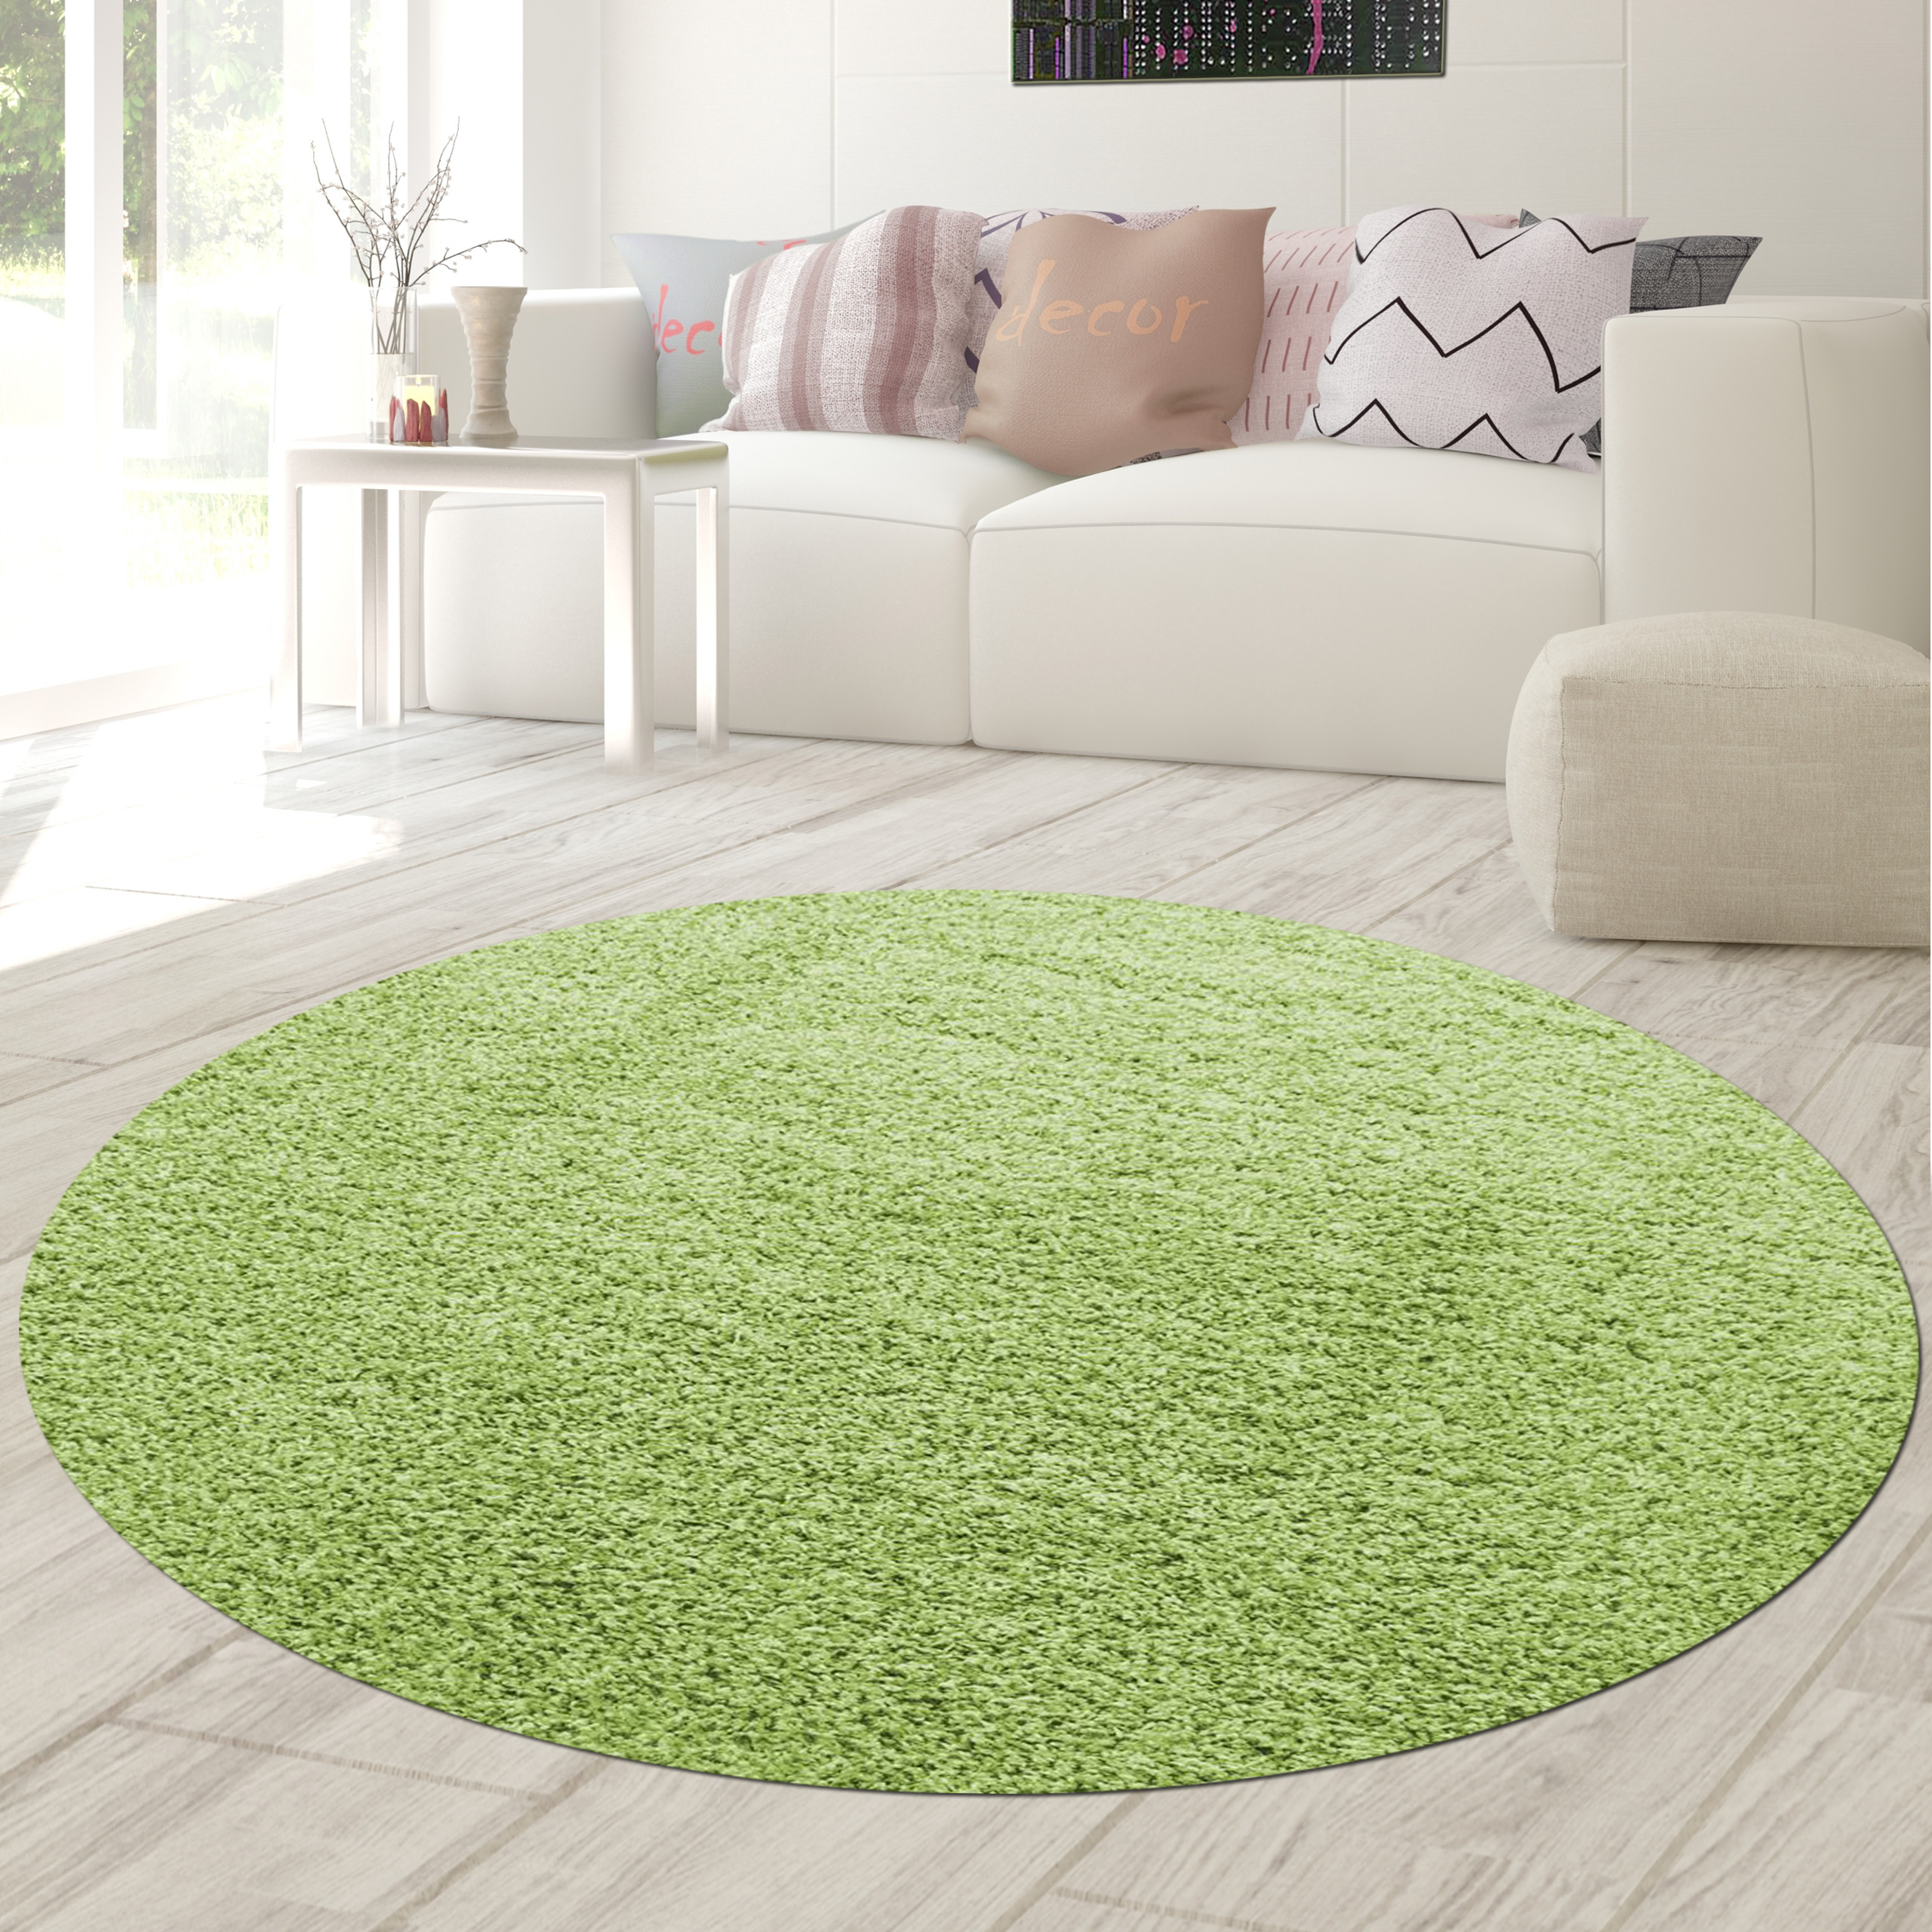 Shag carpet emission free 2.2 frisee, Teppich-Traum Merilon Total 30mm overall 100% (approx) height / weight polypropylenes - gr m² (approx)